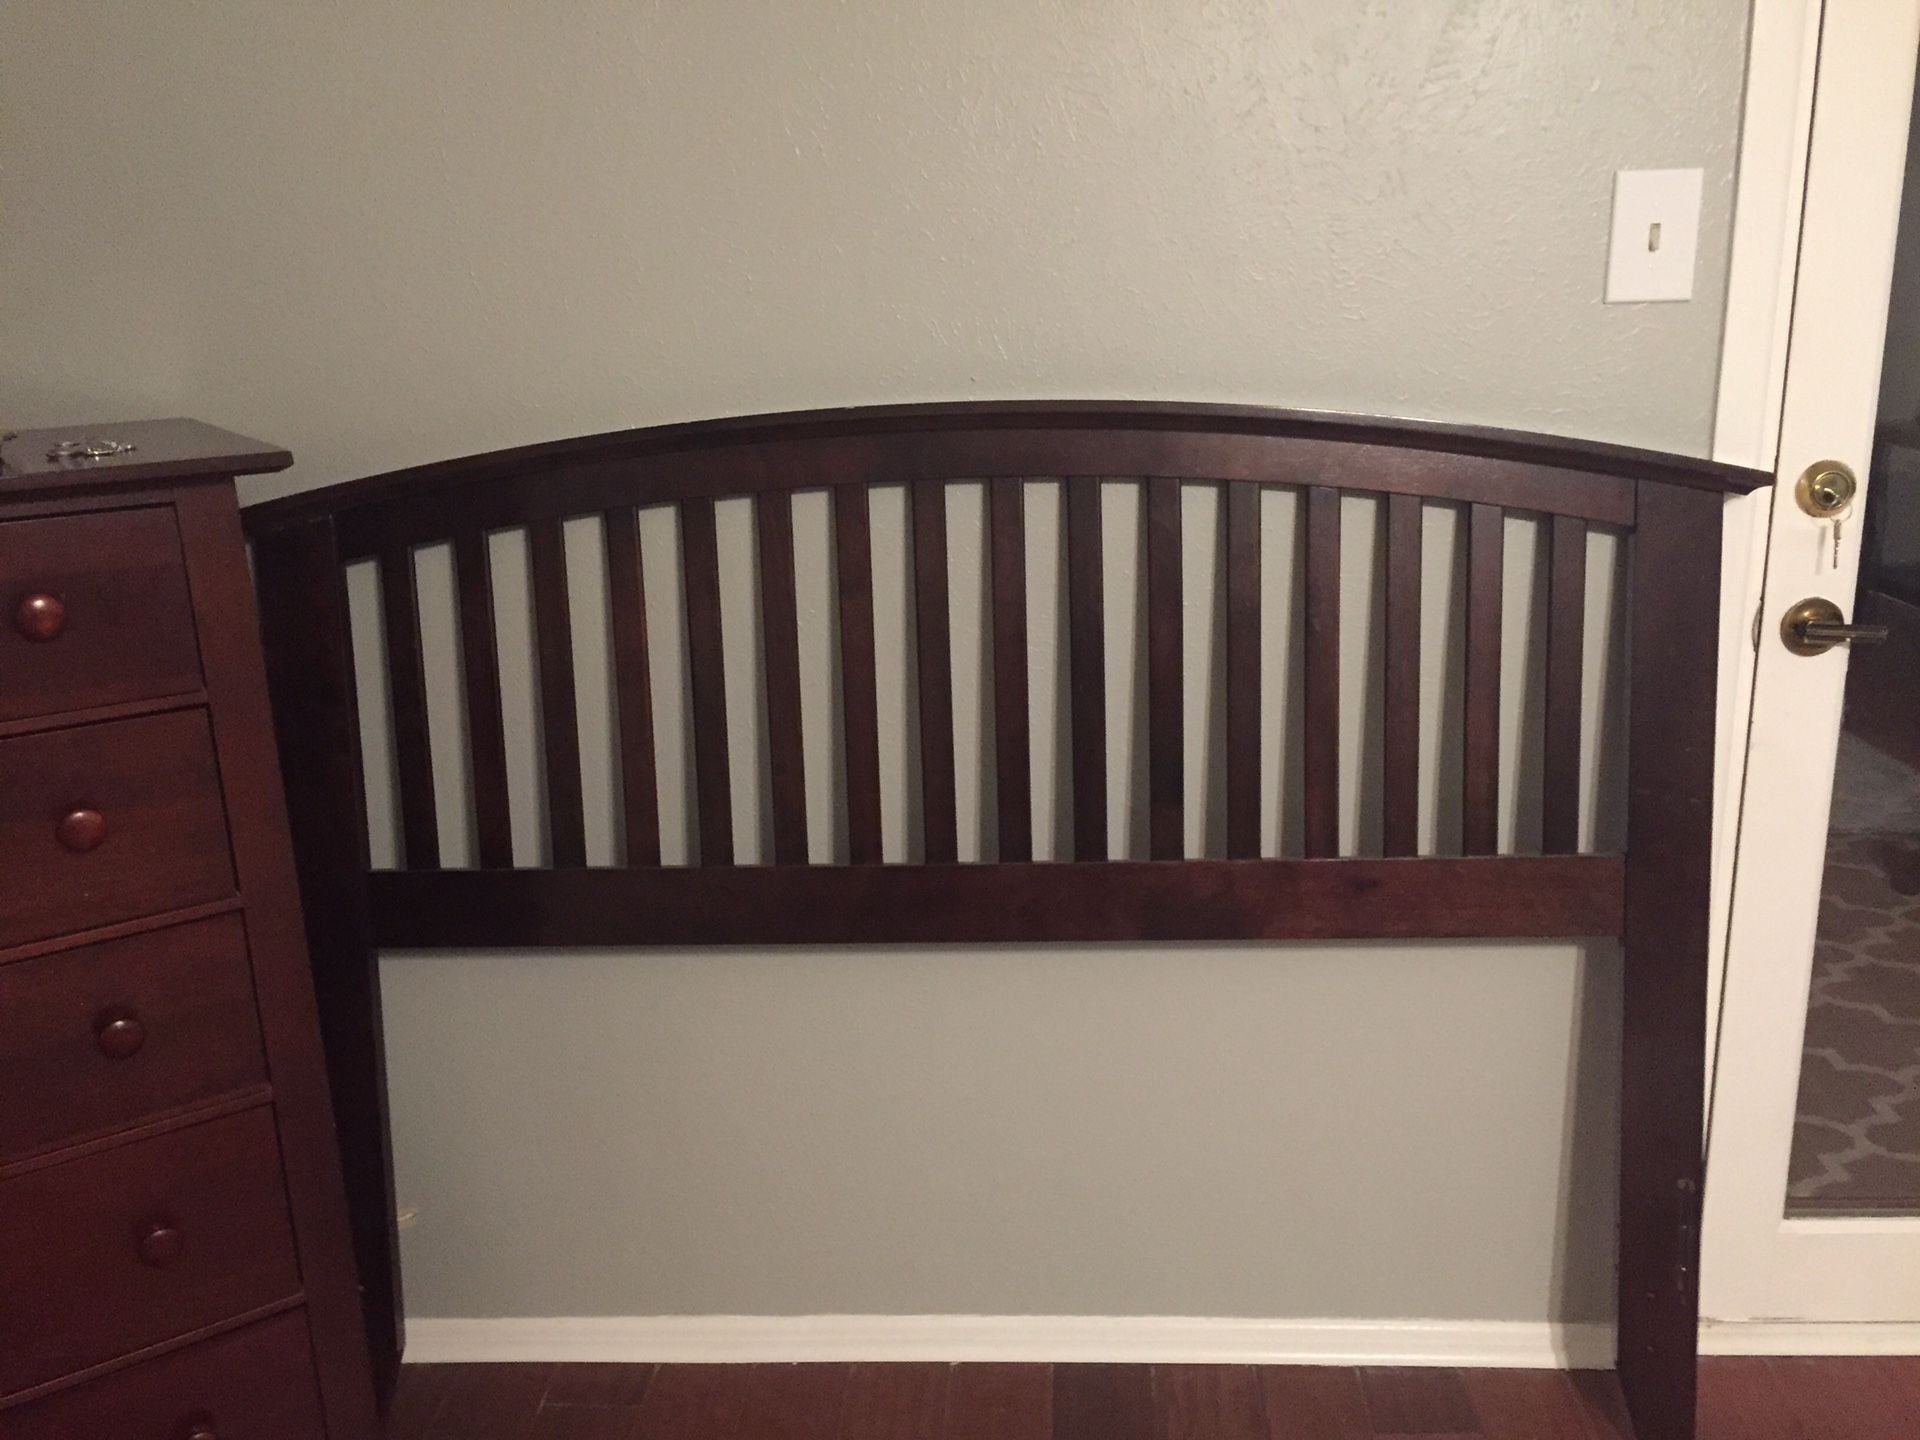 Full-sized box spring, mattress, bedrails, and headboard (does NOT attach)